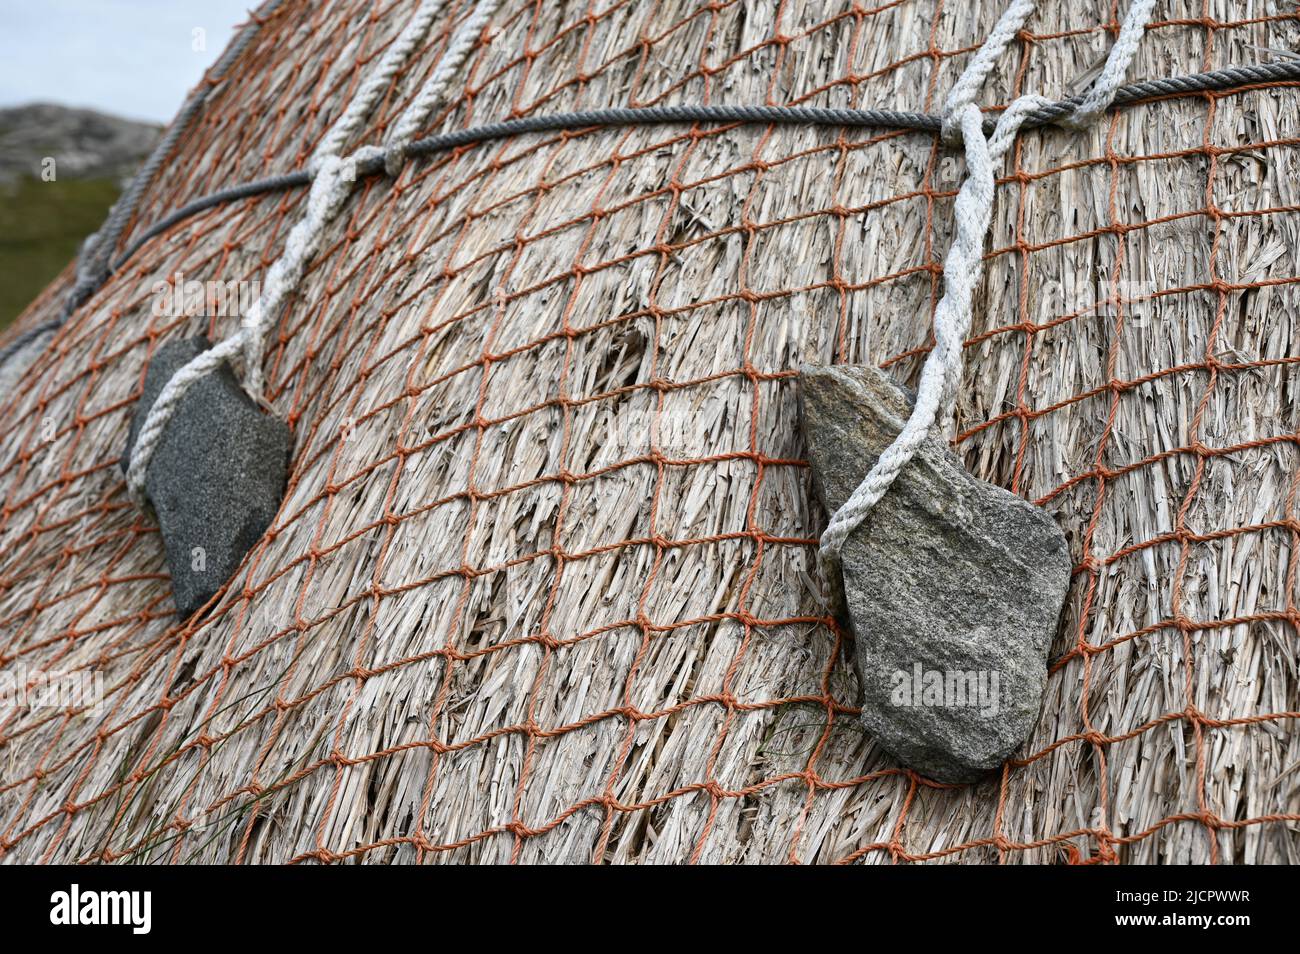 Close up of thatched roof and weighted stones on norse kiln, Shawbost, Isle of Lewis, Outer Hebrides, Scotland, UK. Stock Photo